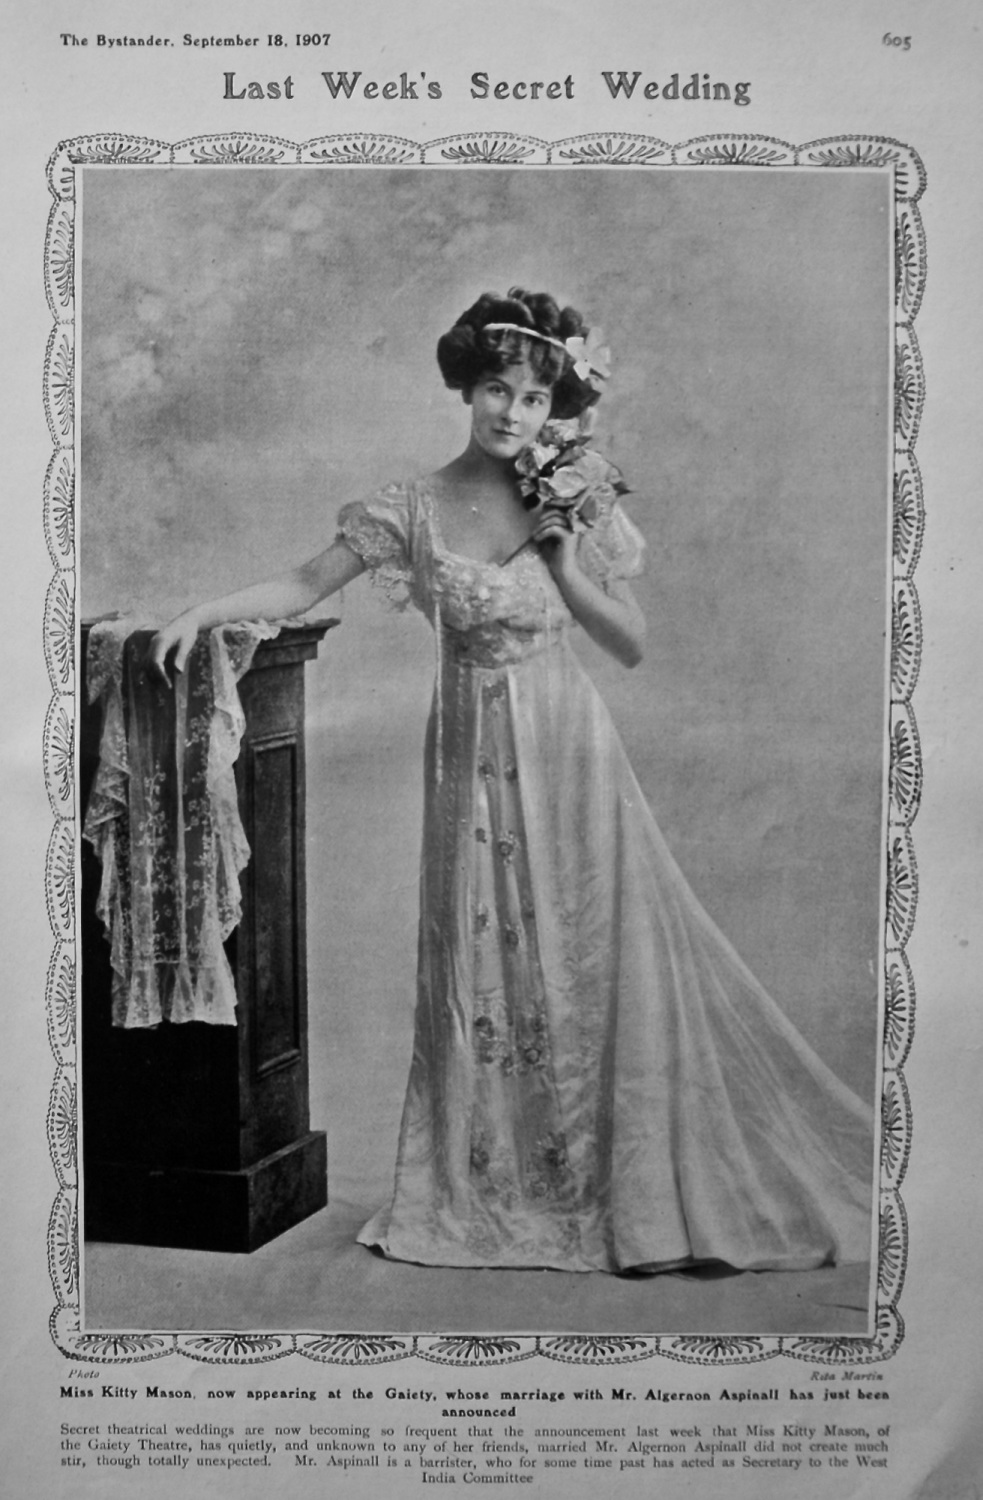 Miss Kitty Mason, now appearing at the Gaiety, whose marriage with Mr. Alge